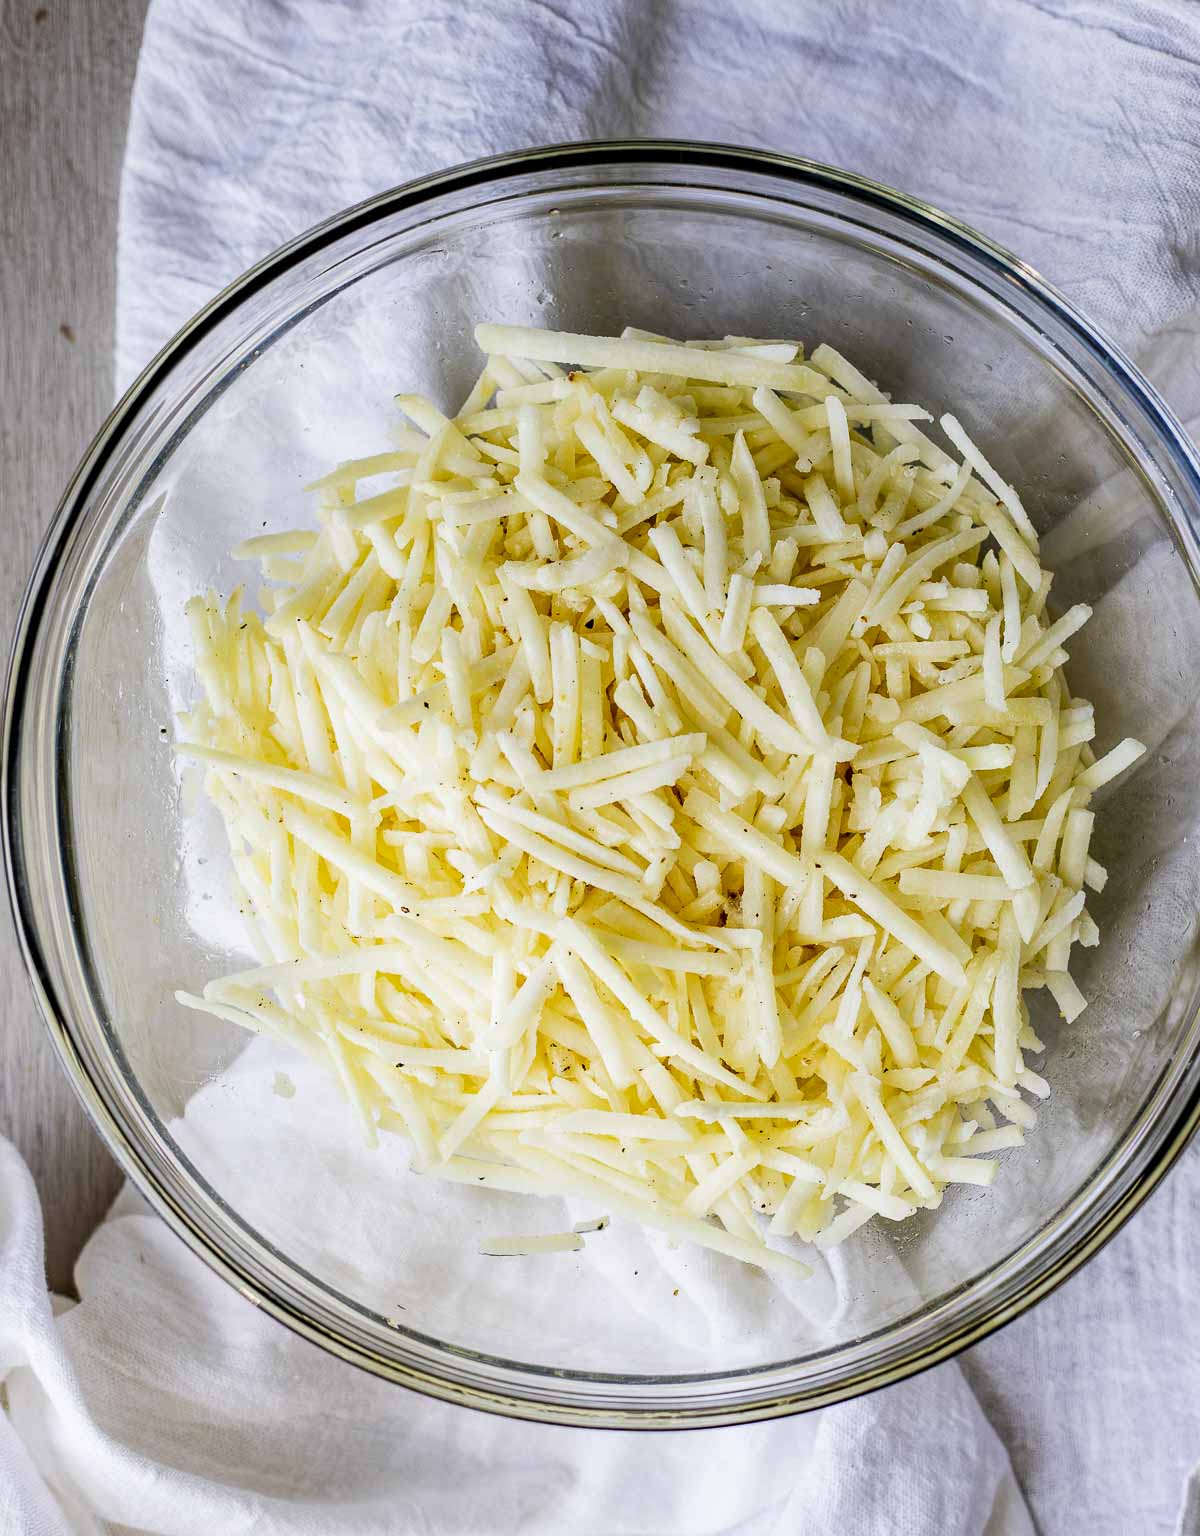 Shredded frozen hash browns in a glass bowl.